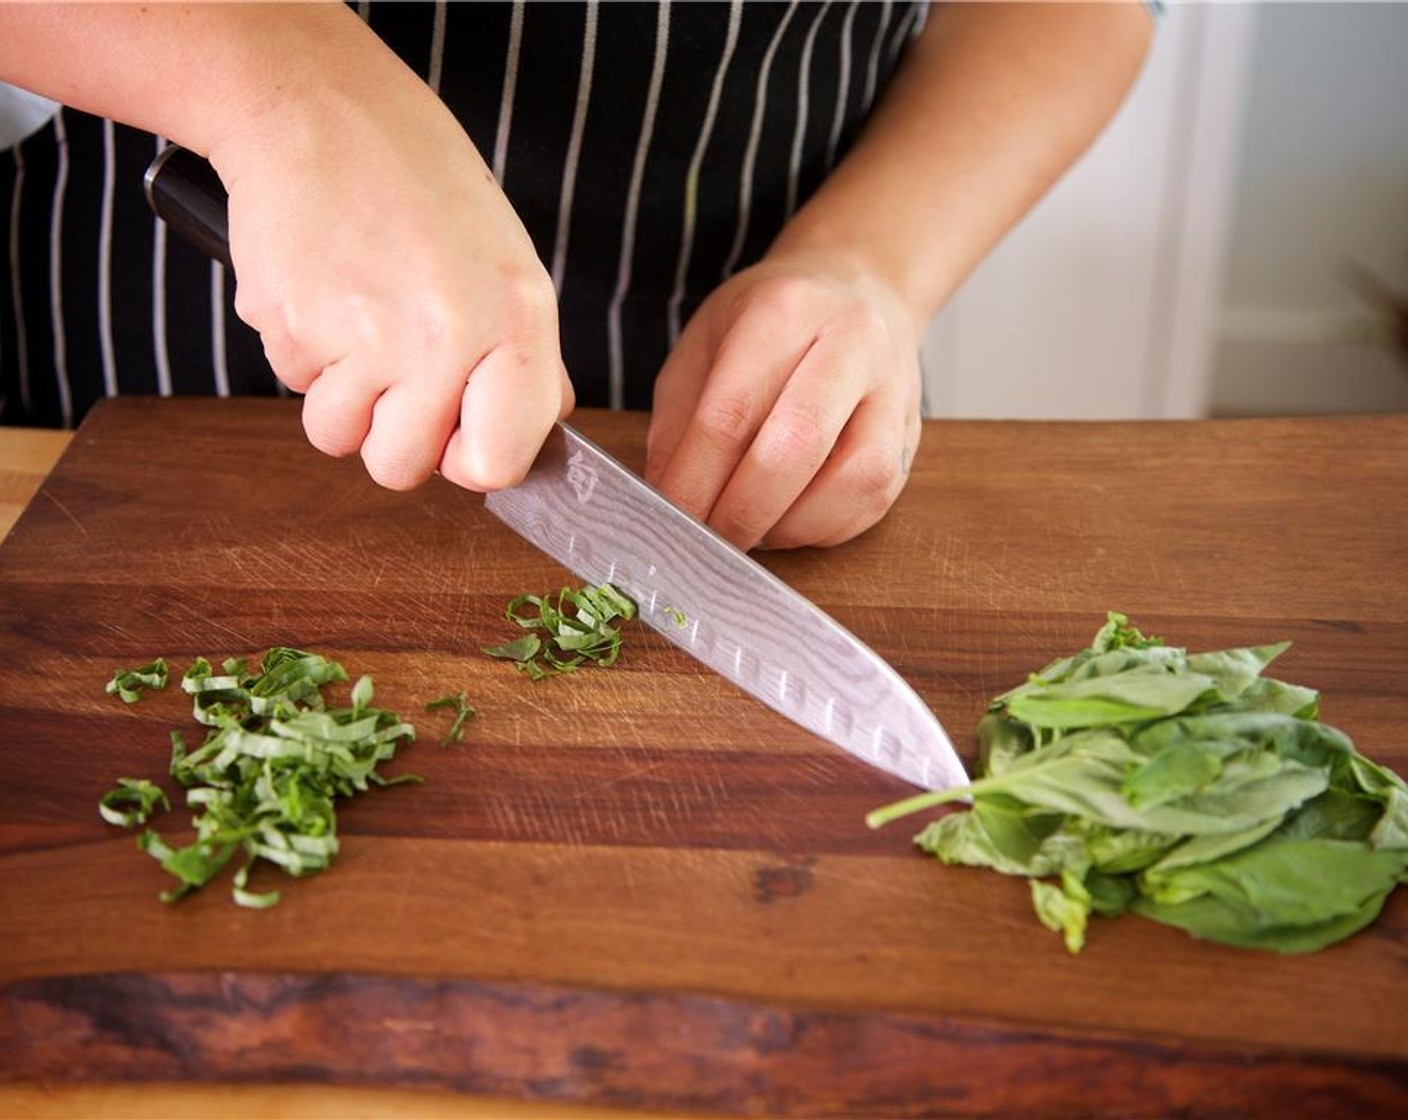 step 5 Remove Fresh Parsley (3 Tbsp) and Fresh Oregano (1/3 cup) leaves from their stems. Set aside several parsley leaves for garnish. Roughly chop remaining parsley with oregano leaves, and add to bowl.